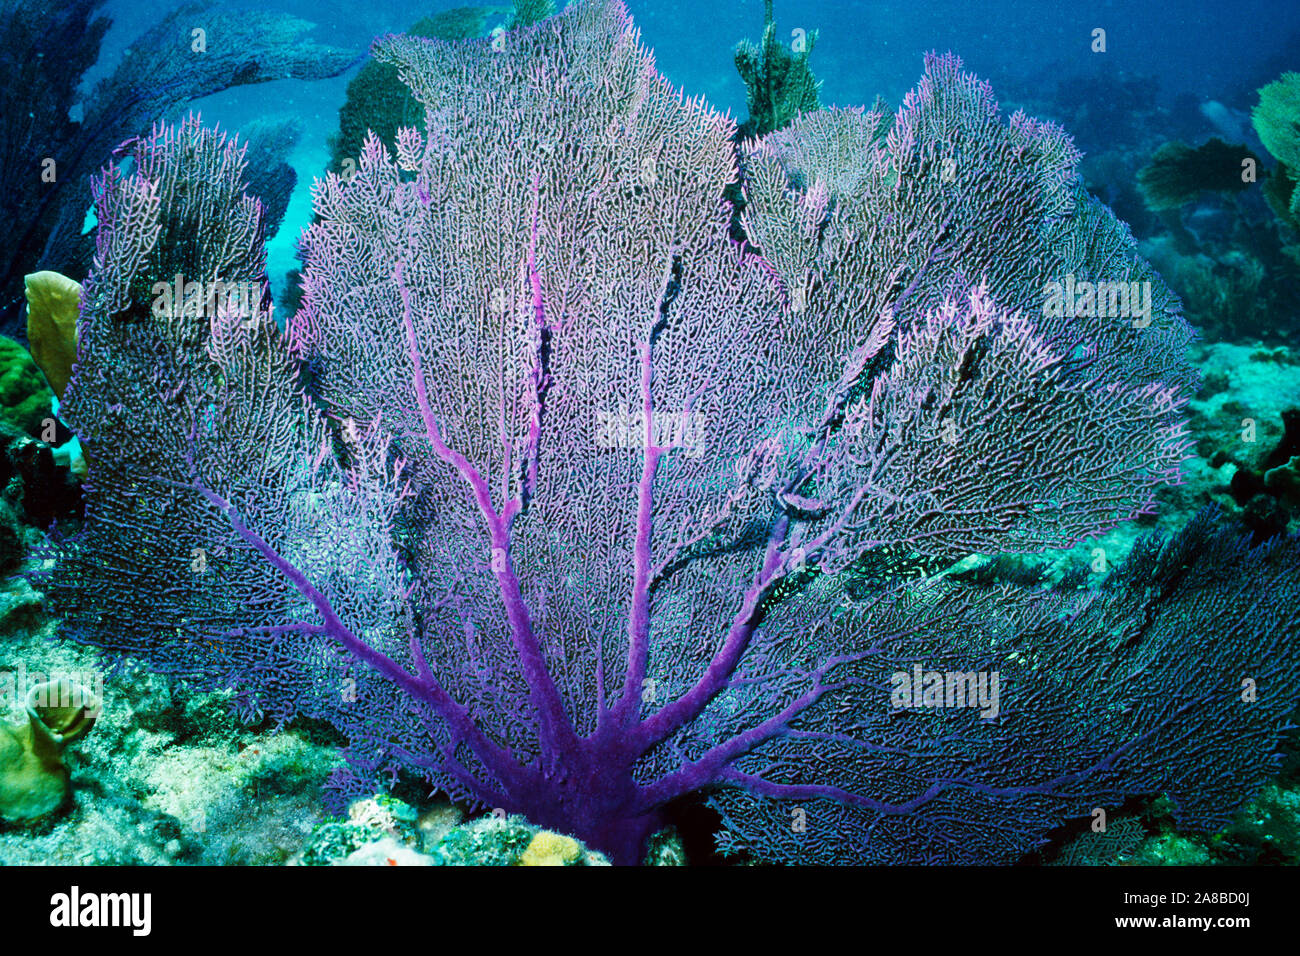 Underwater view of sea fan coral, Pickles Reef, Key Largo, Florida, USA Stock Photo